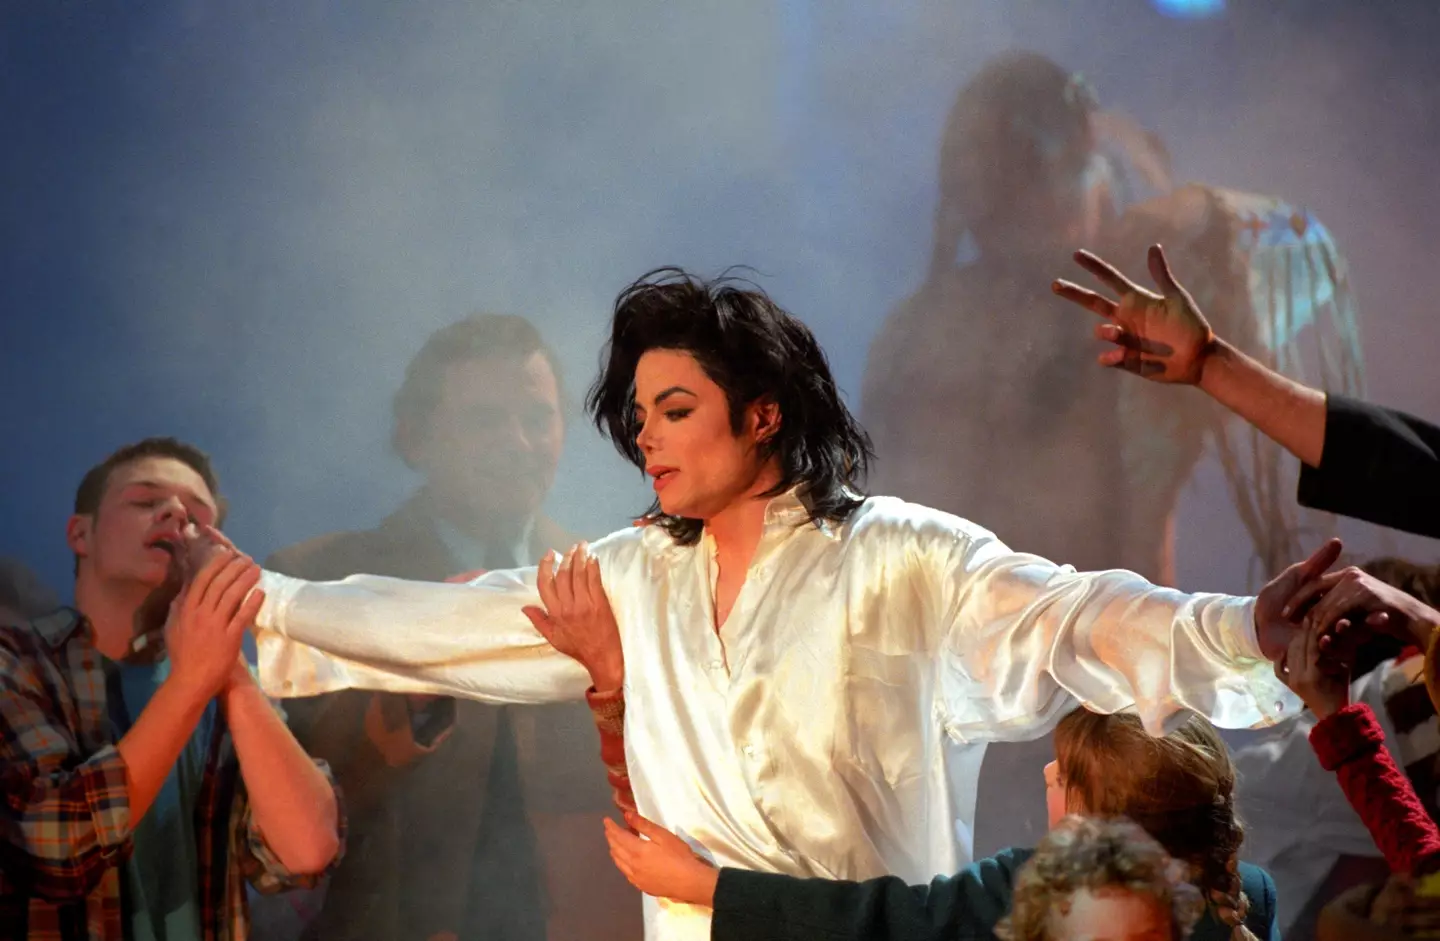 Michael Jackson was largely considered the 'King of Pop' for his legendary contributions to the music industry.